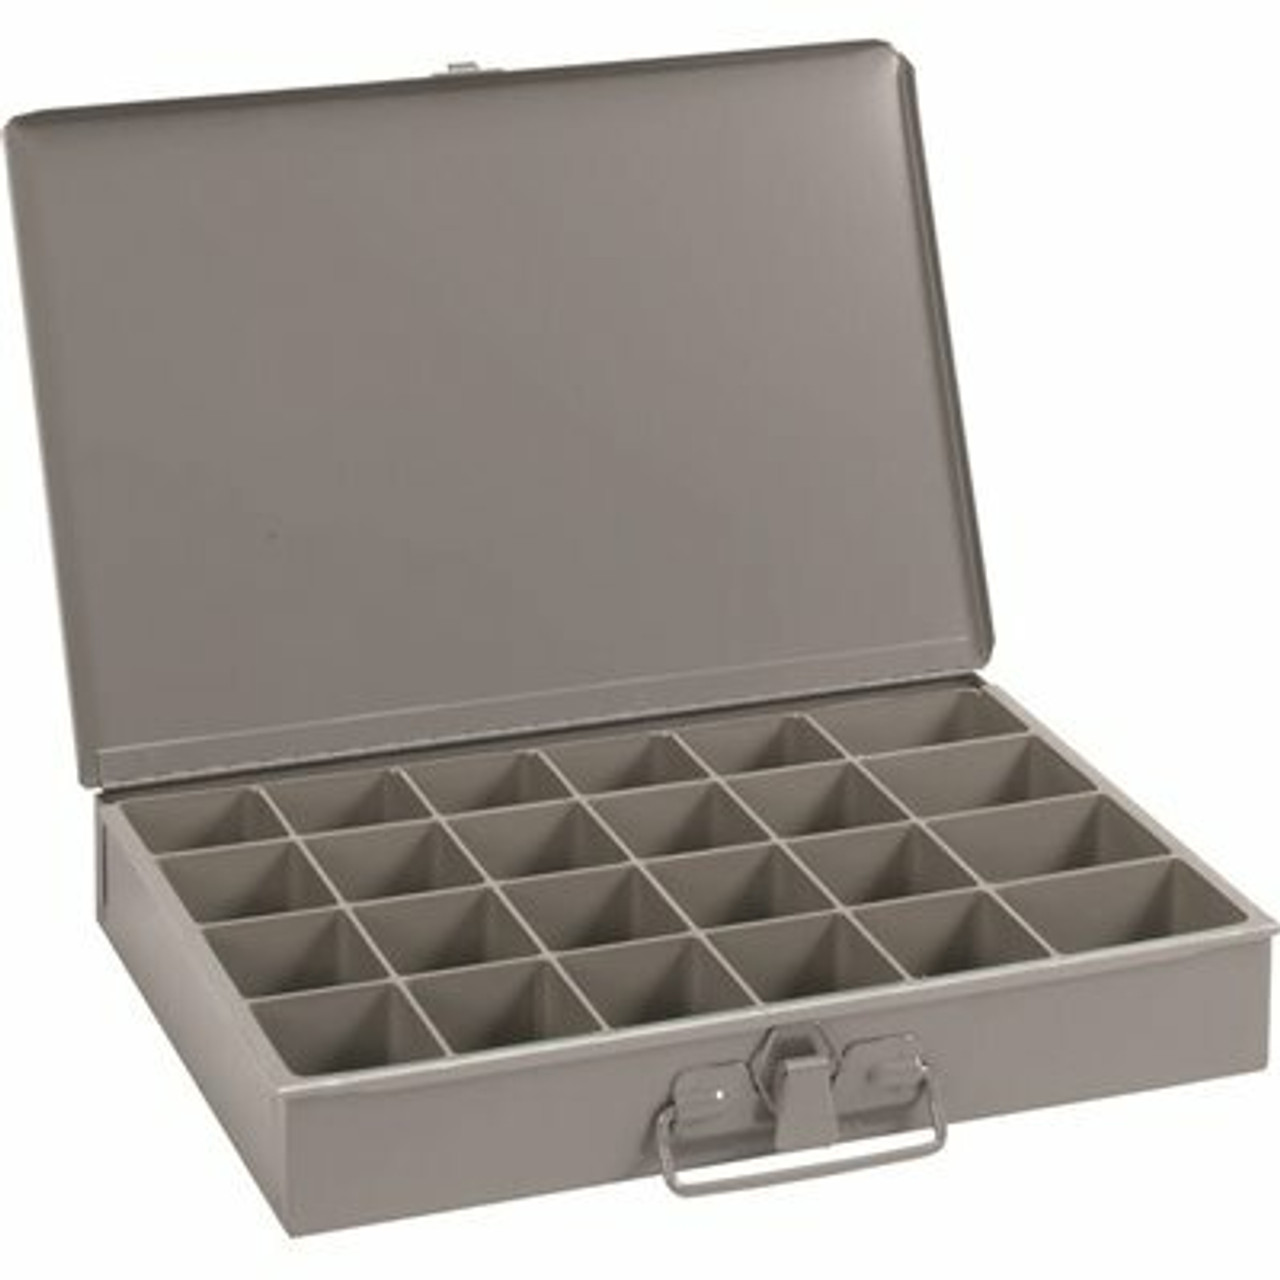 #6 Thru 1/4 In. 18-8 Stainless Steel Nuts And Washers Assortment In Metal Drawer (825-Pieces)